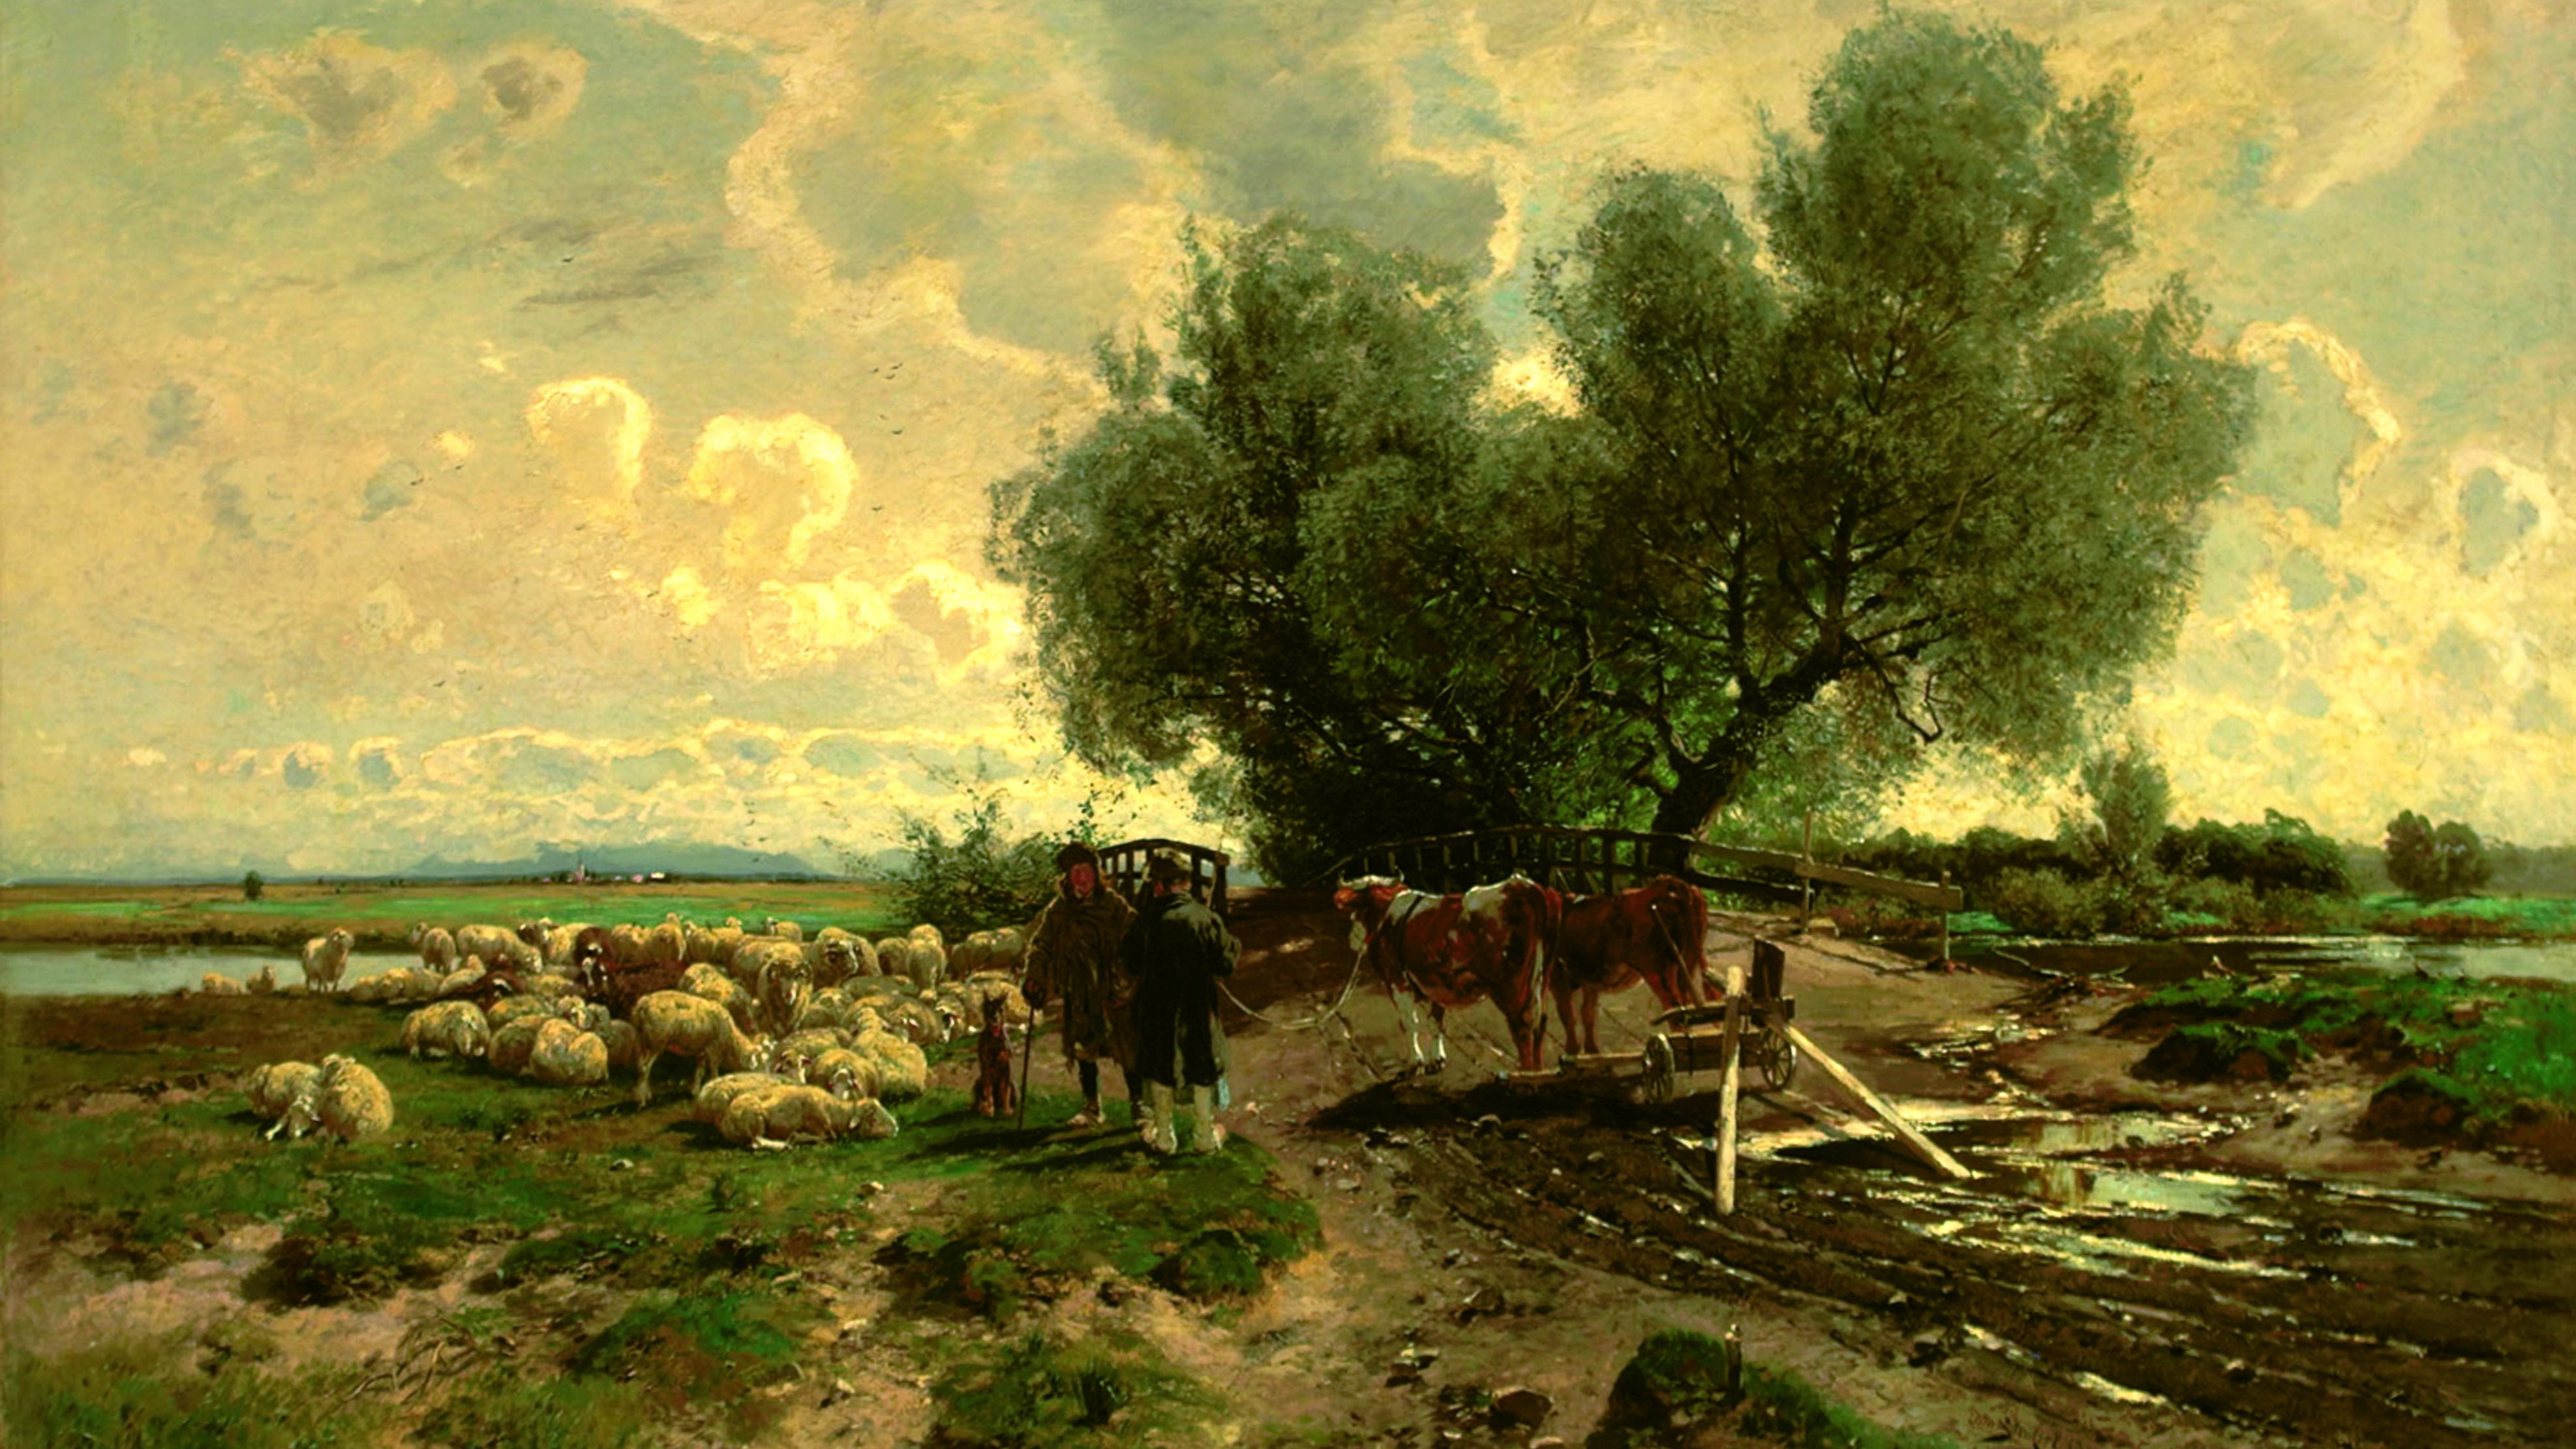 Painting by Otto Strützel, "Amper bridge near Mitterndorf" shows shepherd with herd of sheep and farmer with 2 cattle at wooden bridge over the river Amper